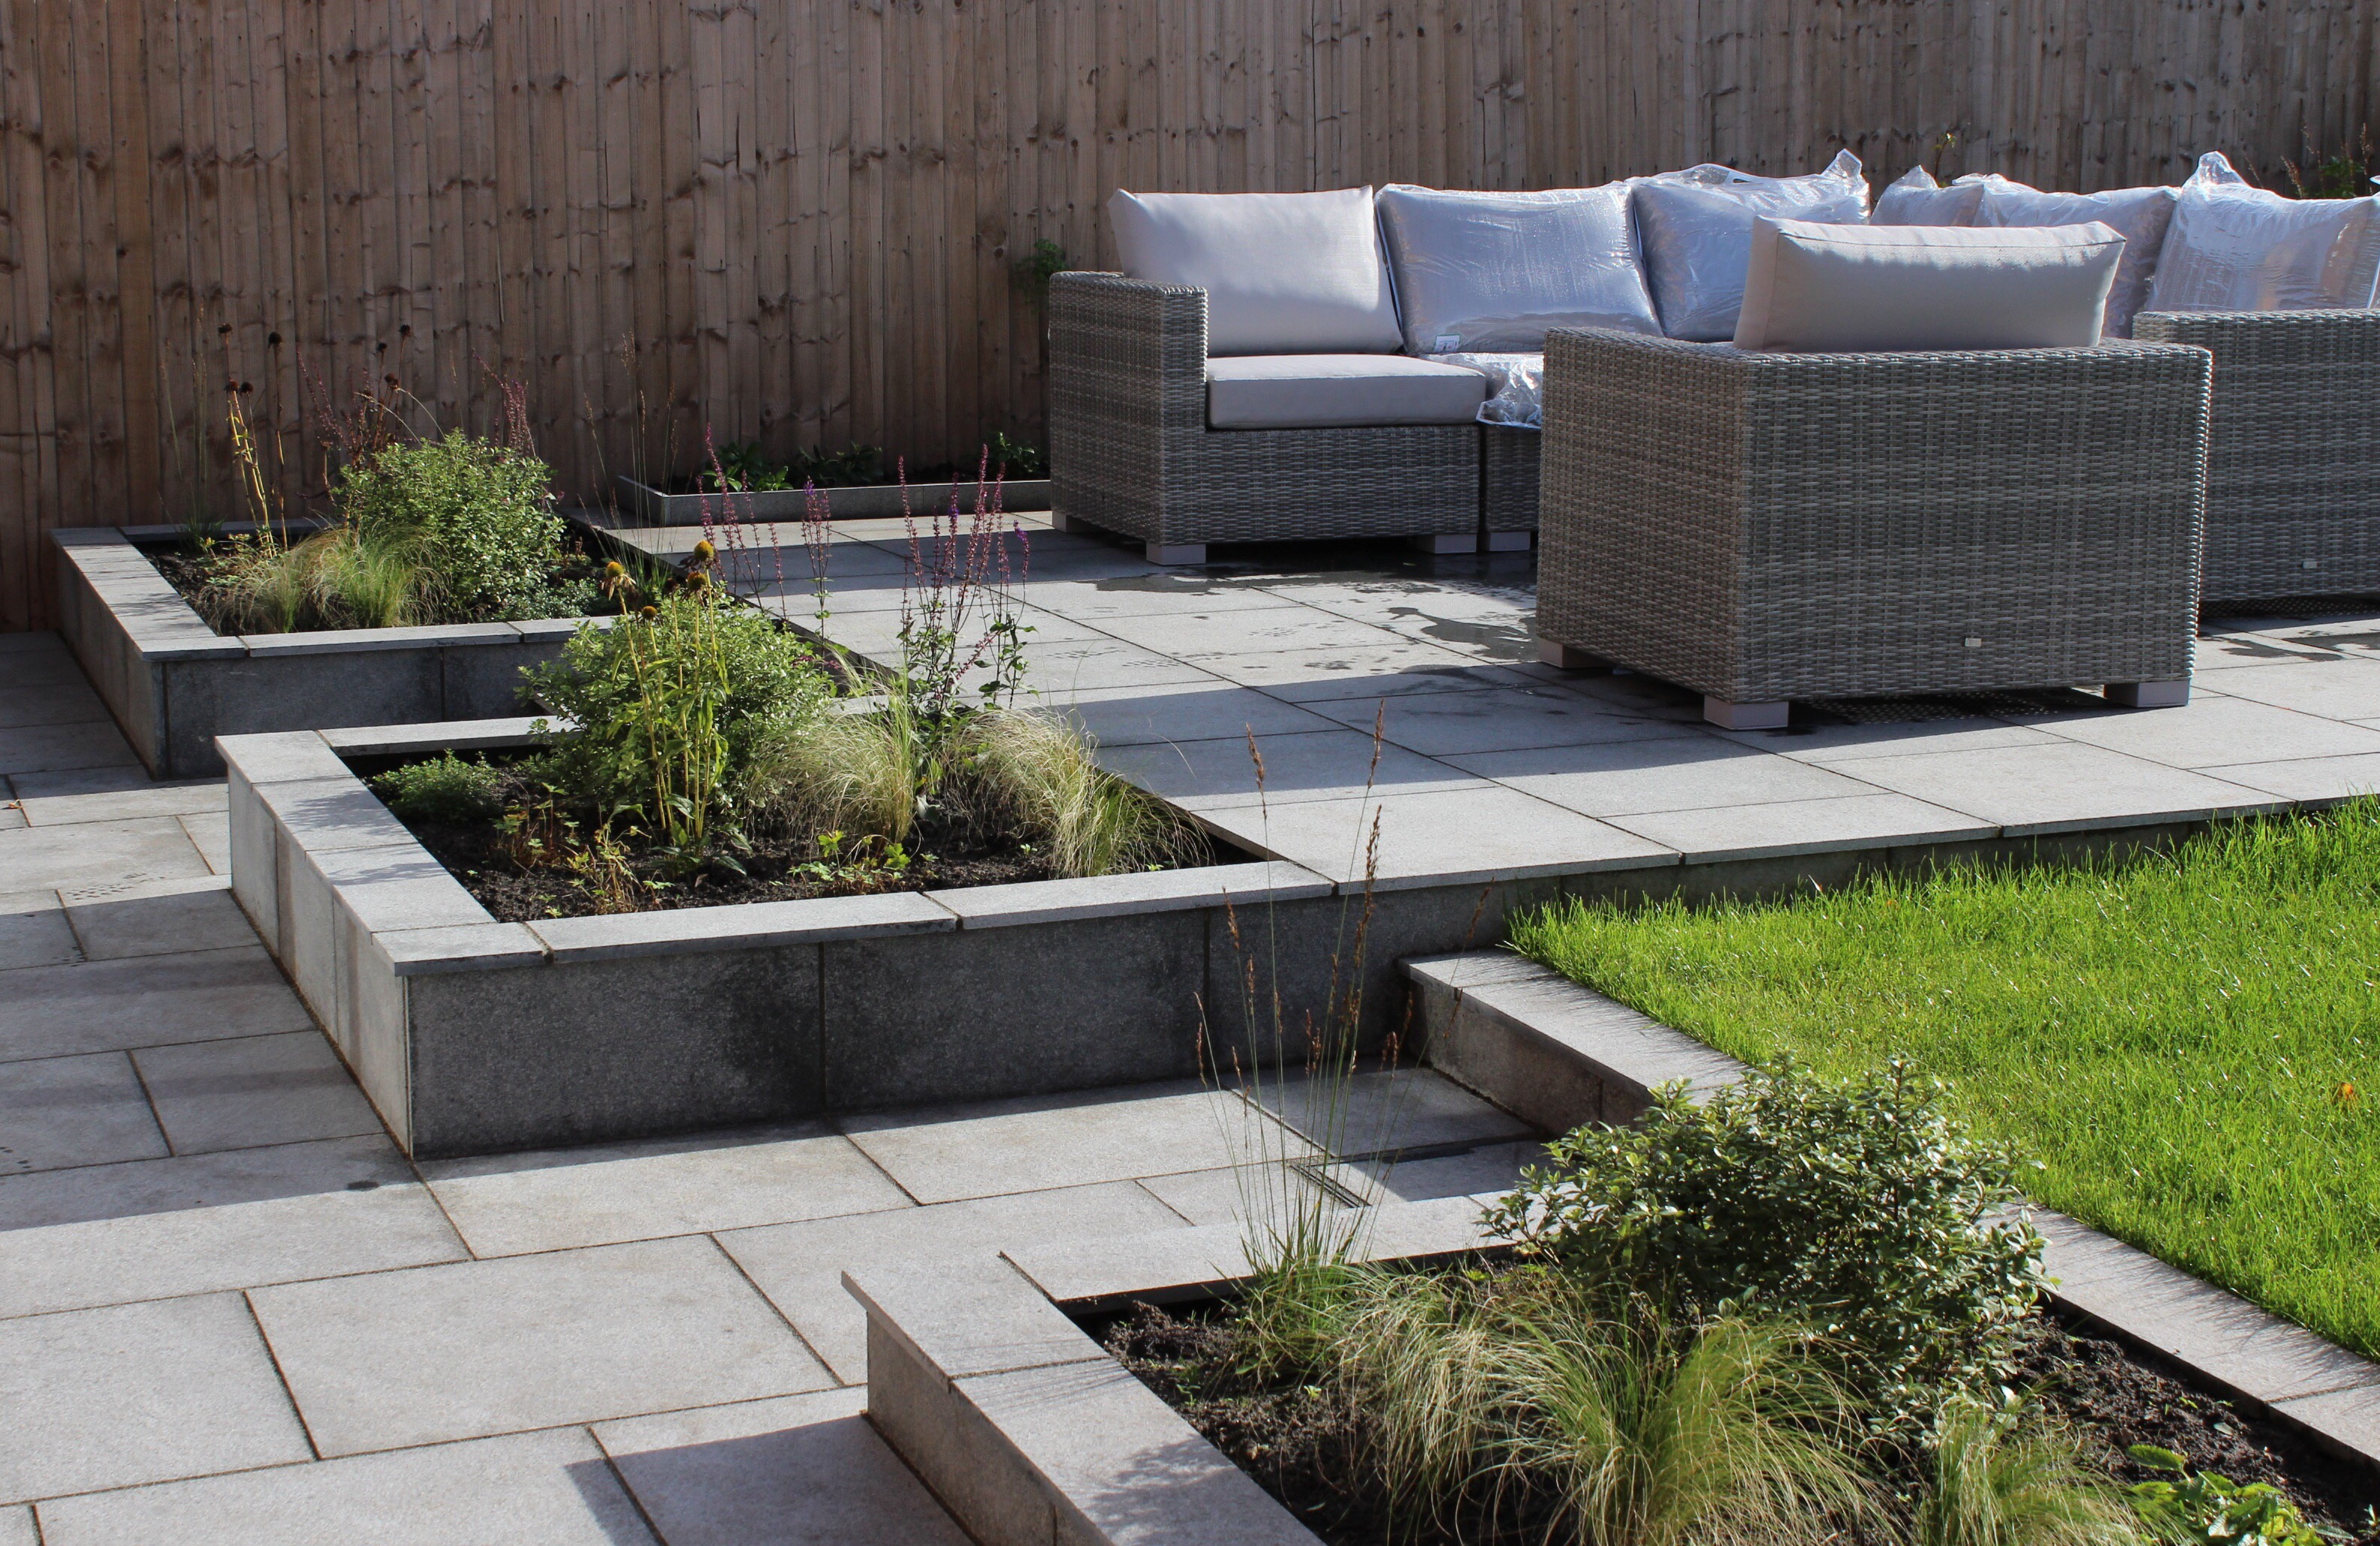 </p> <p>Find your ideal home design pro on designfor-me.com - get matched and see who's interested in your home project. Click image to see more inspiration from our design pros</p> <p>Design by Lindsay, garden designer from West Lancashire, North West</p> <p> #gardendesign #gardeninspiration #gardenlove #gardenideas #gardens </p> <p>